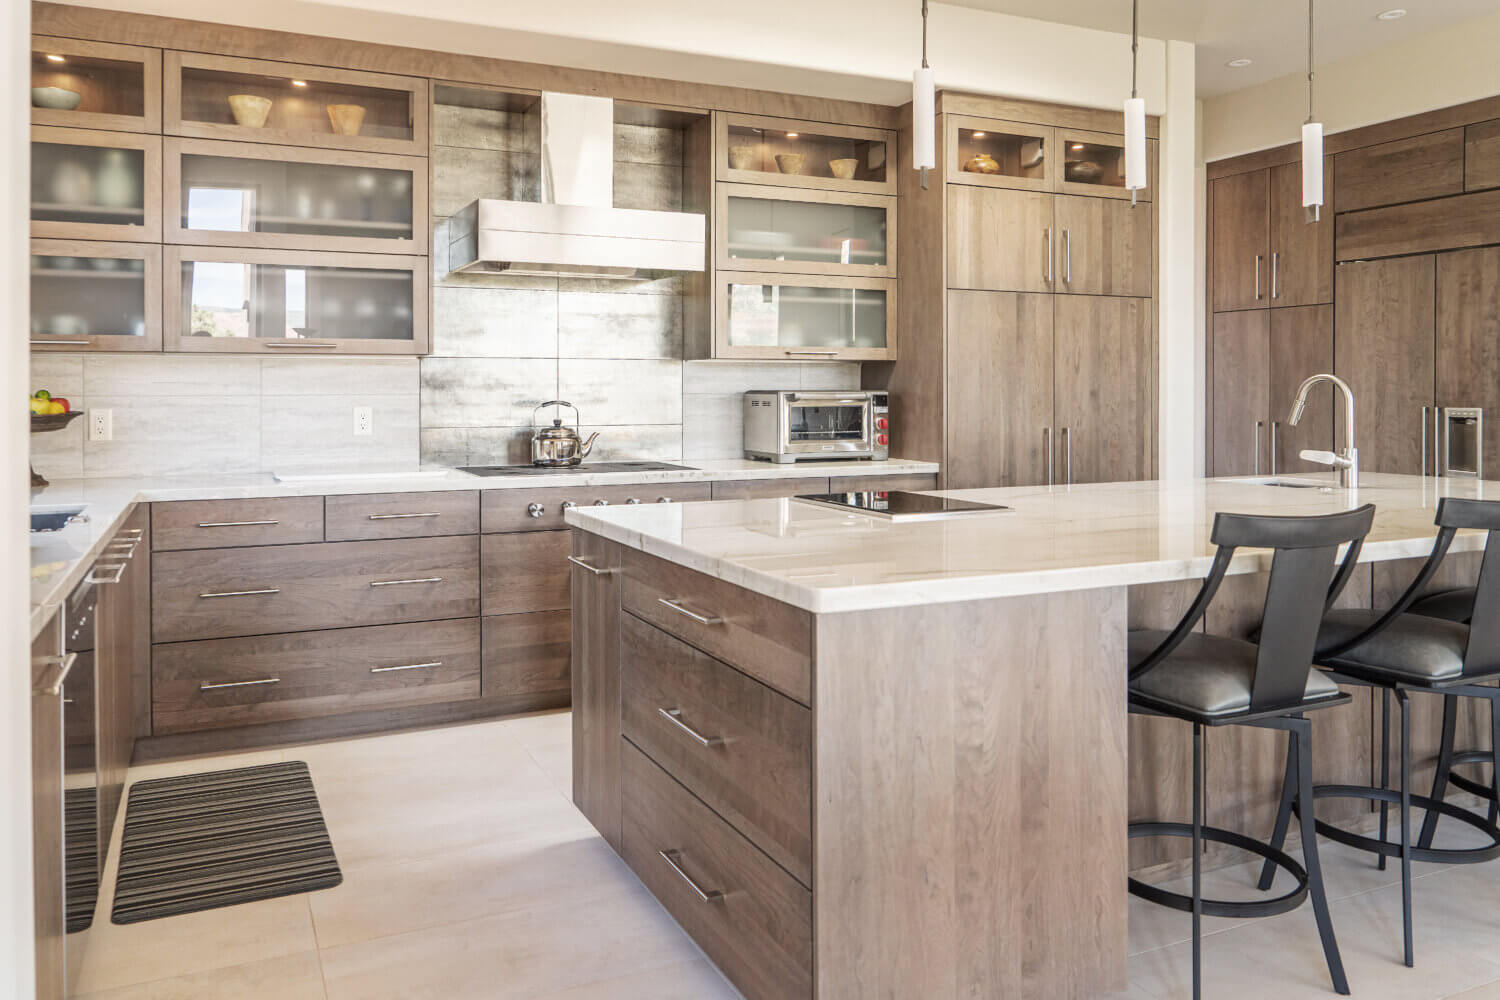 A soft contemporary frameless design featuring Cherry cabinets with the Camden slab door style from Dura Supreme Cabinetry.This modern kitchen is warm and inviting with is soft brown stained wood cabinets.